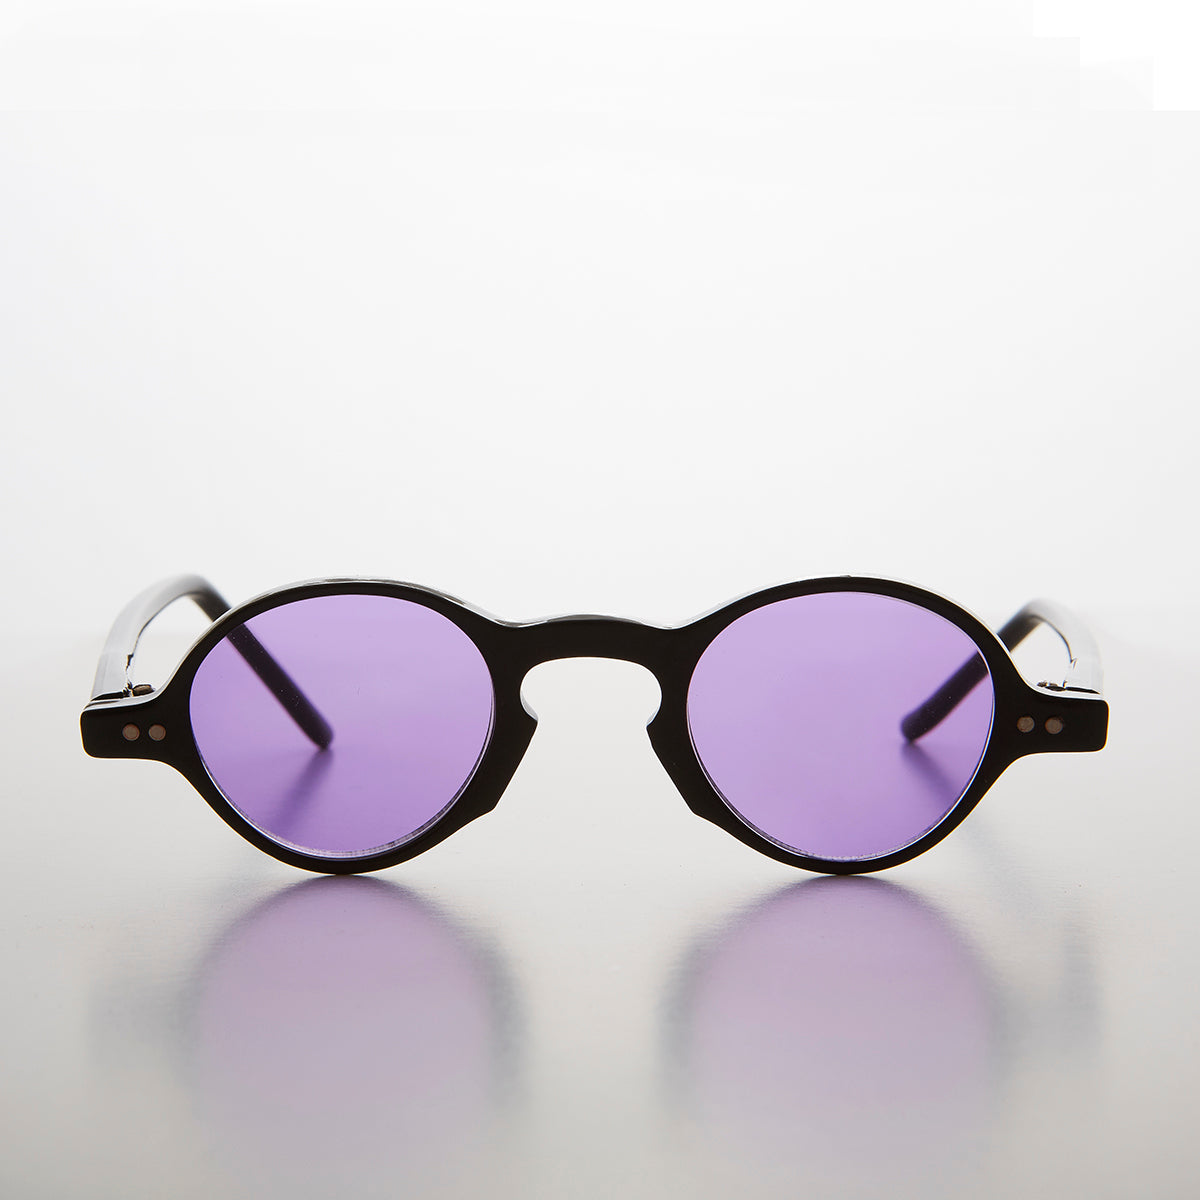 Small Spectacle Sunglass with Color Tinted Lens